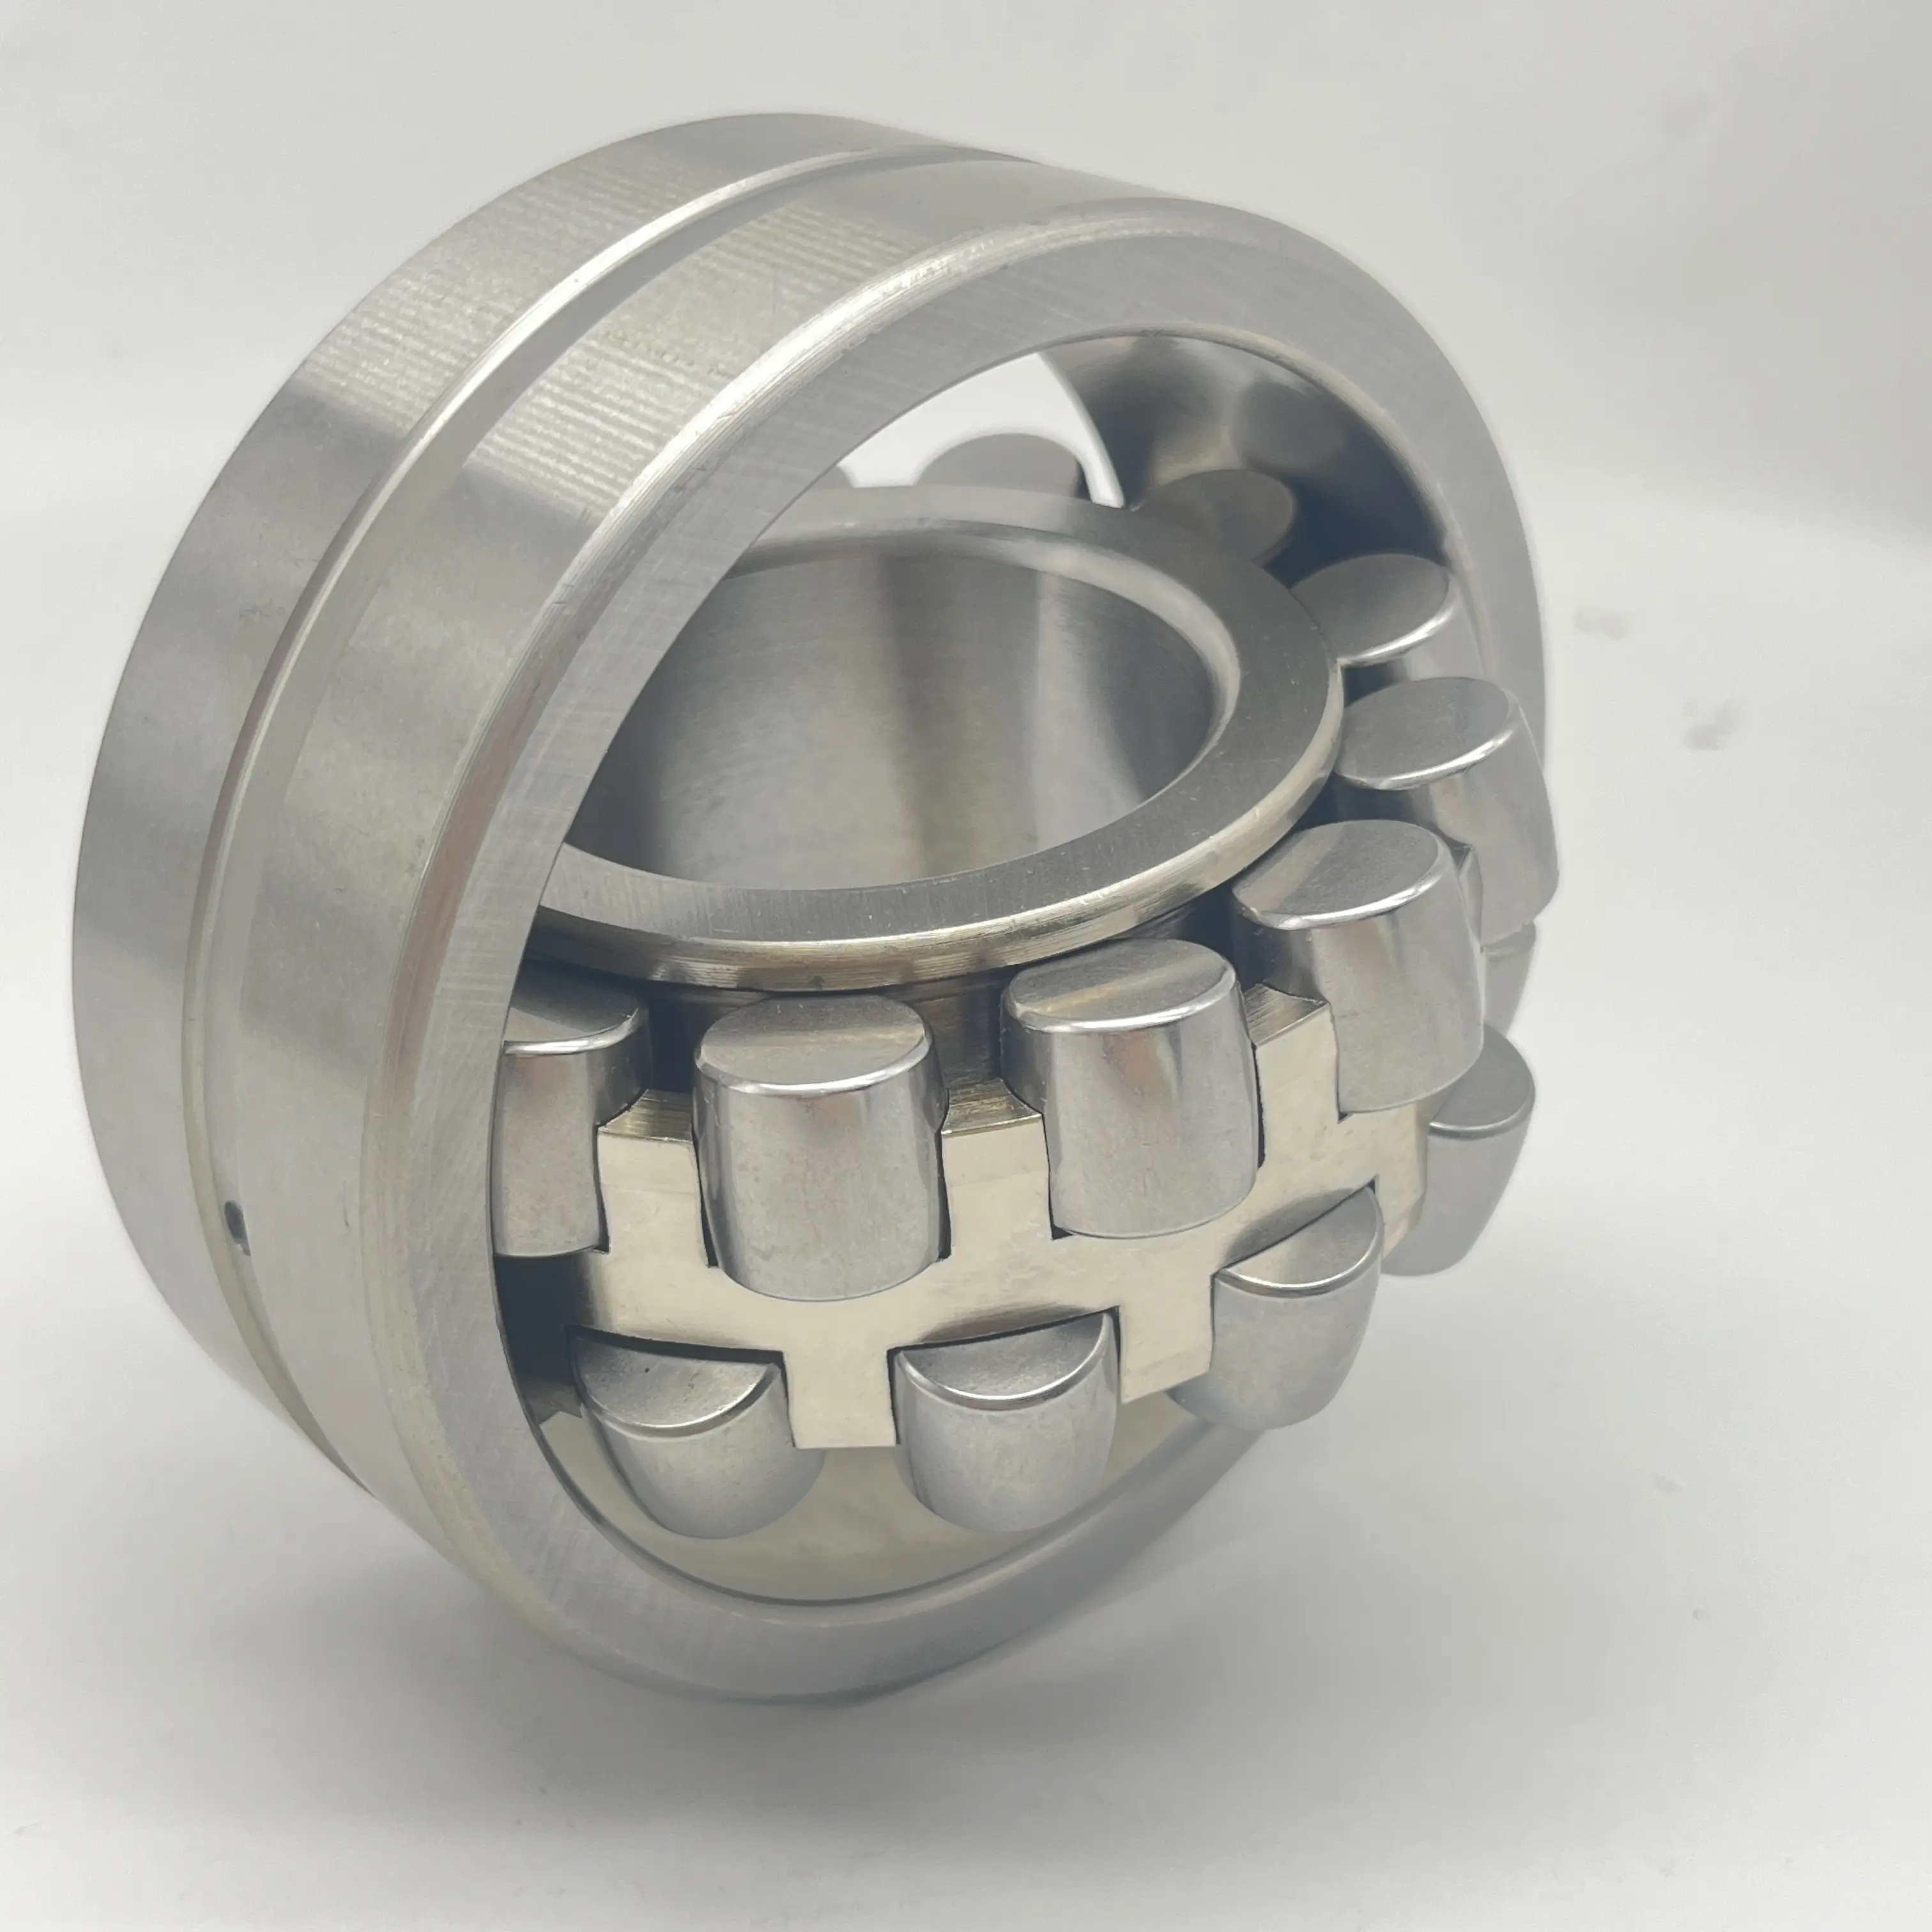 Production and manufacturing of 420 material stainless steel self-aligning roller bearing SS23240